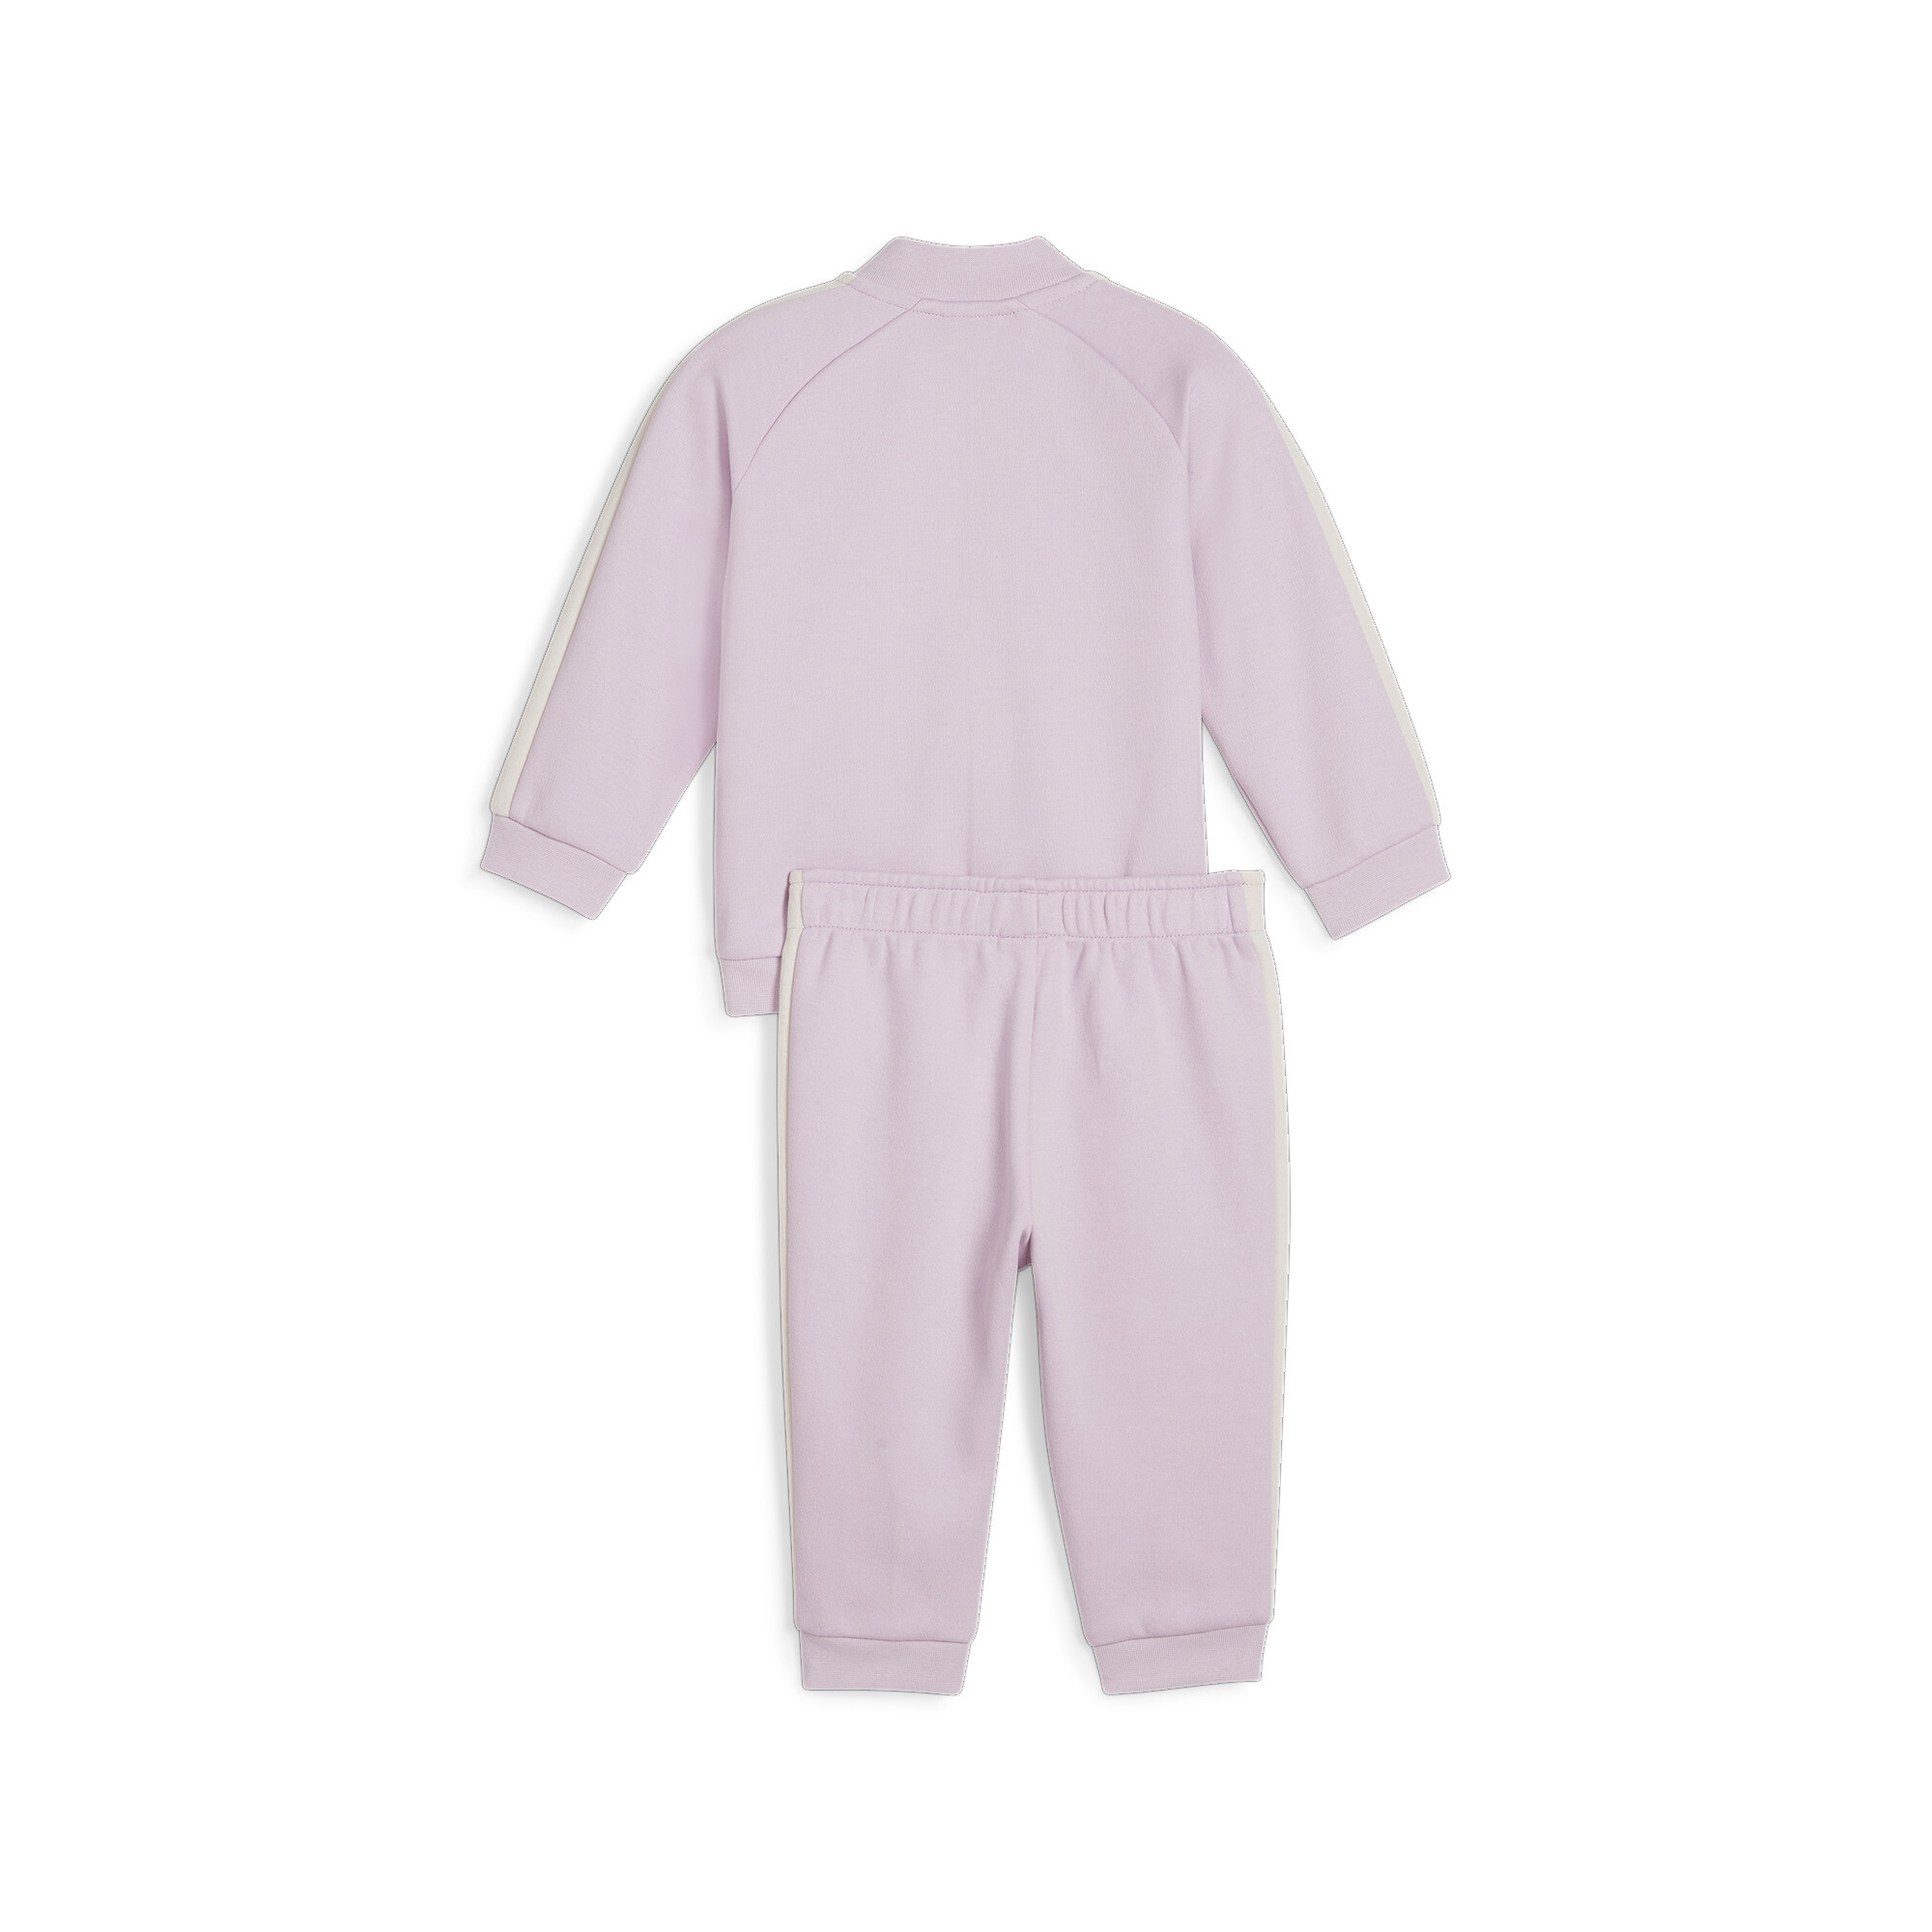 PUMA MINICATS T7 ICONIC Baby Tracksuit Set In 90 - Purple, Size 1-2 Youth